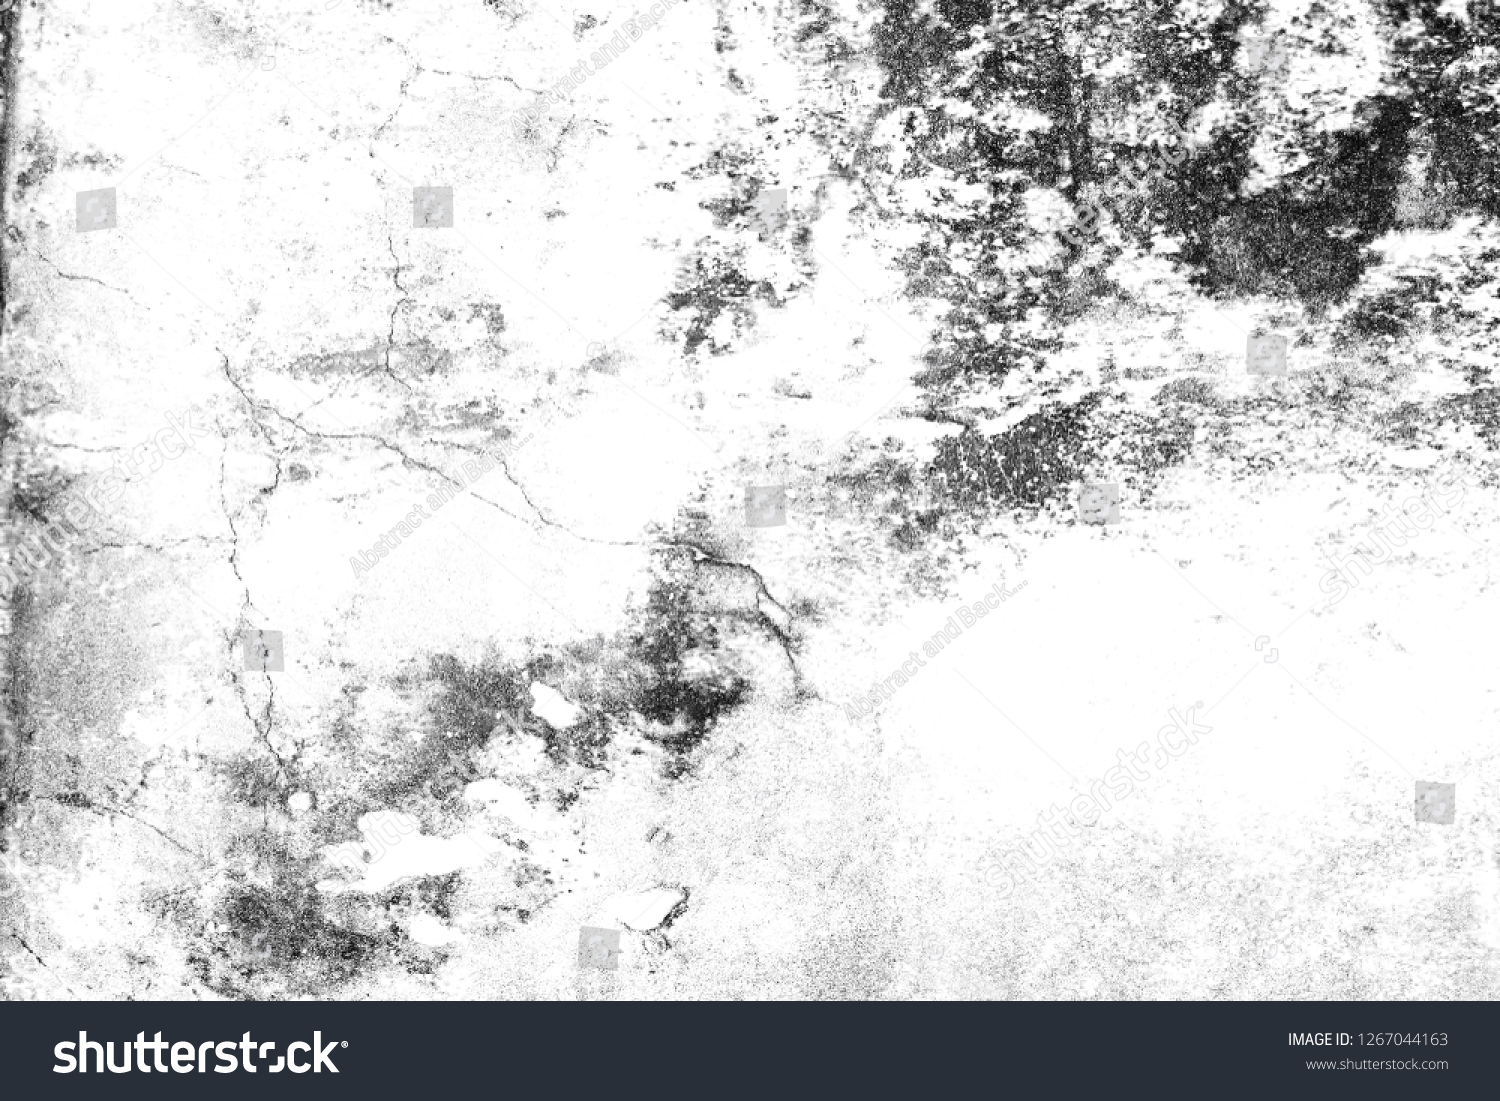 Grunge black and white texture. Abstract monochrome pattern of cracks, scuffs, chips, stains, ink spots, lines. Dark design background surface. #1267044163